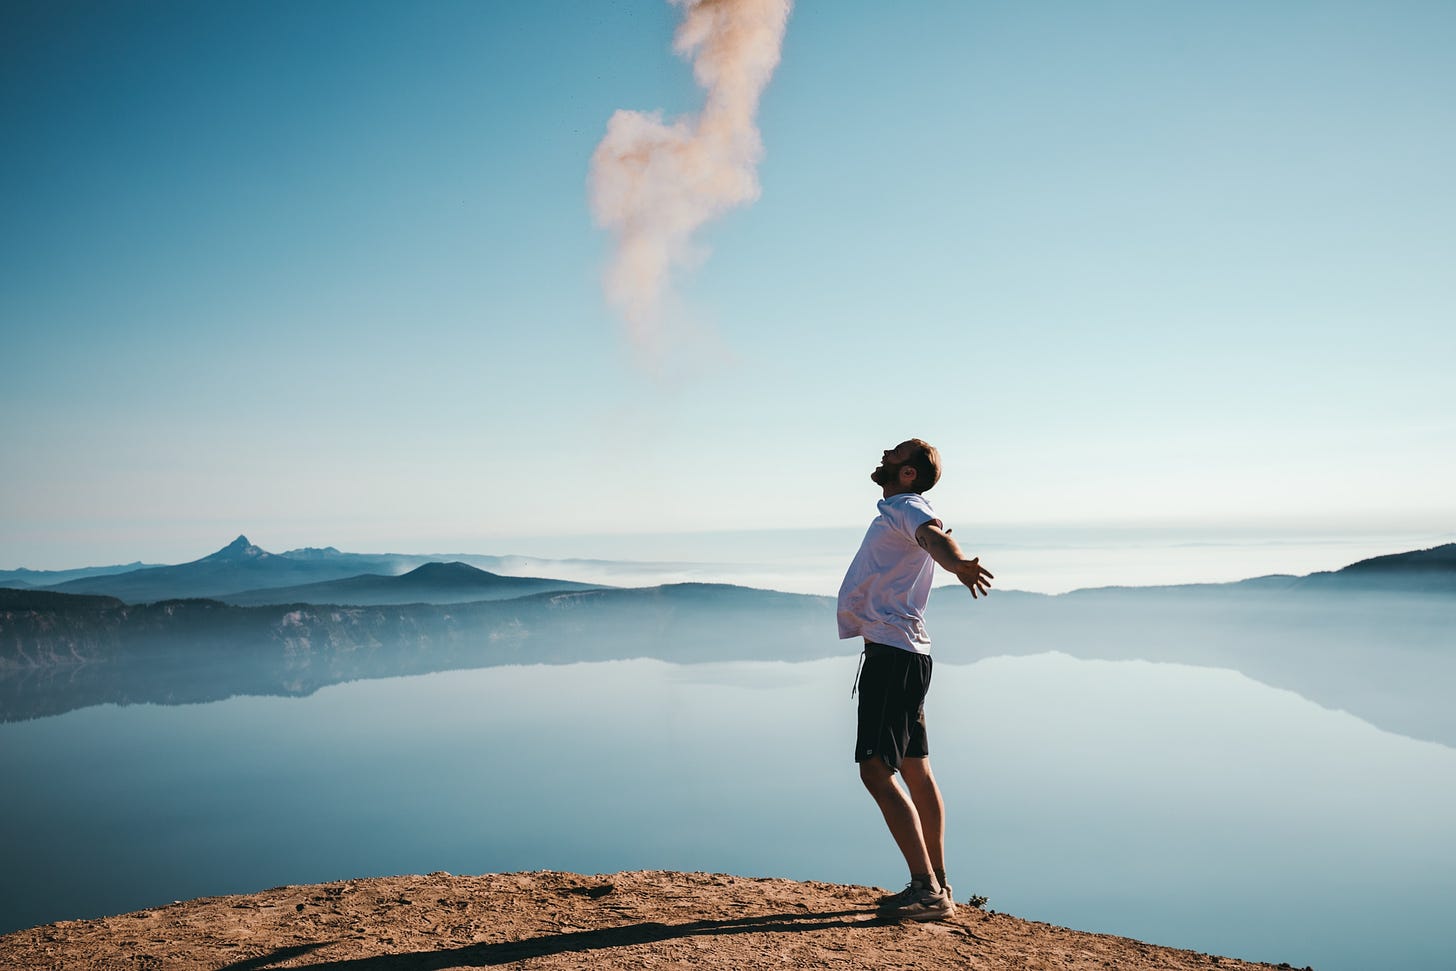 A white man stands in front of a mountain lake and jumps with his arms kind of behind him. He looks really happy but in a very corporate, posed kind of way